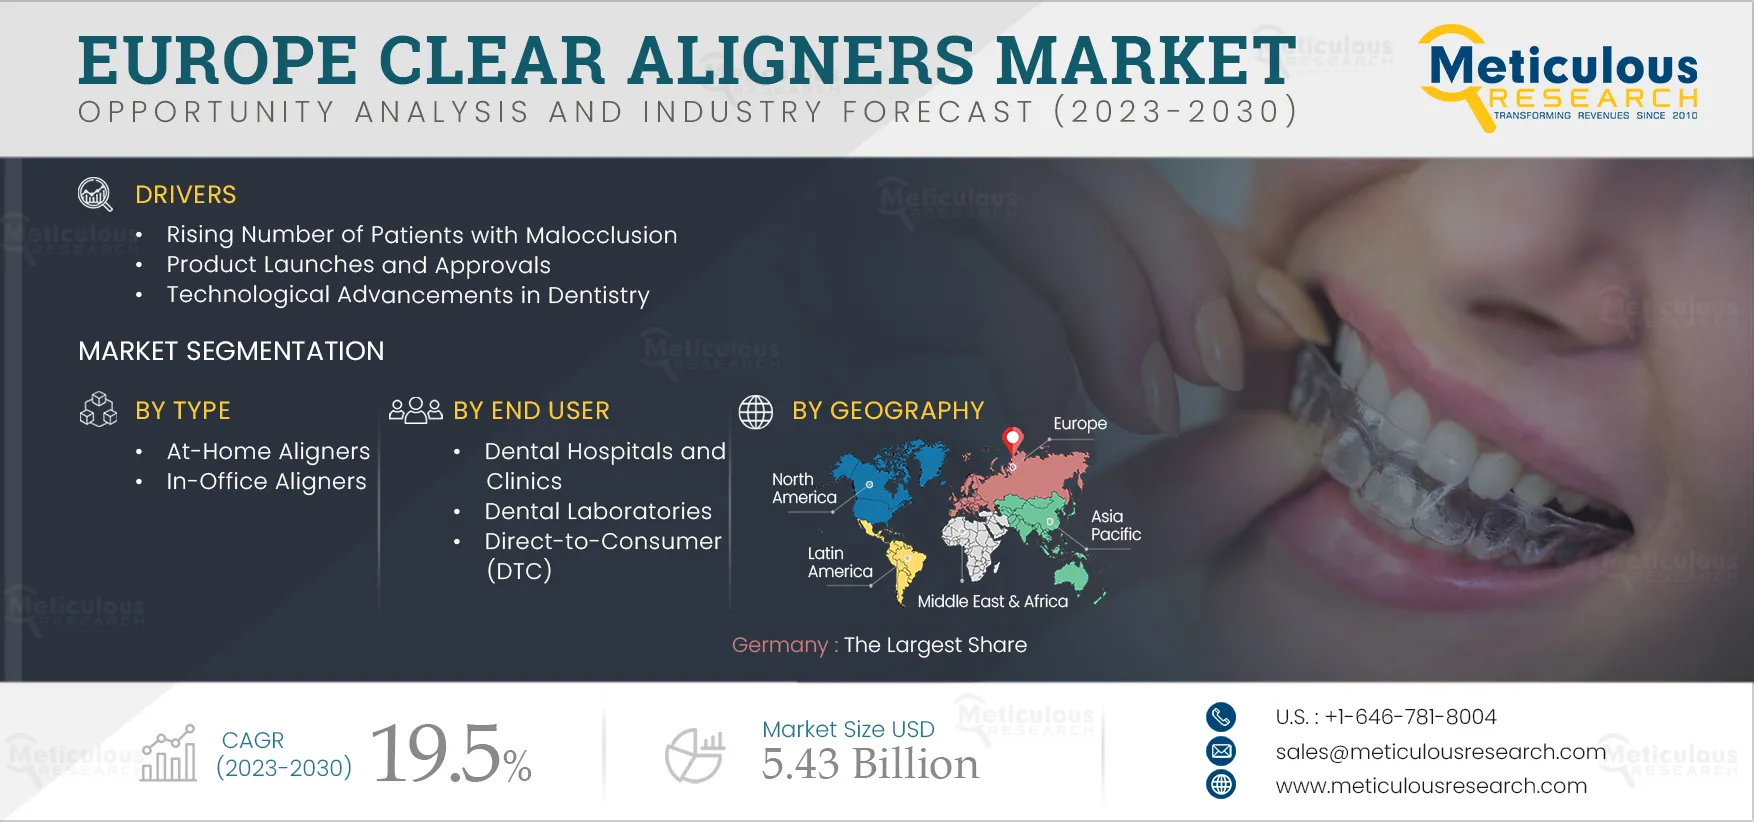 Europe Clear Aligners Market